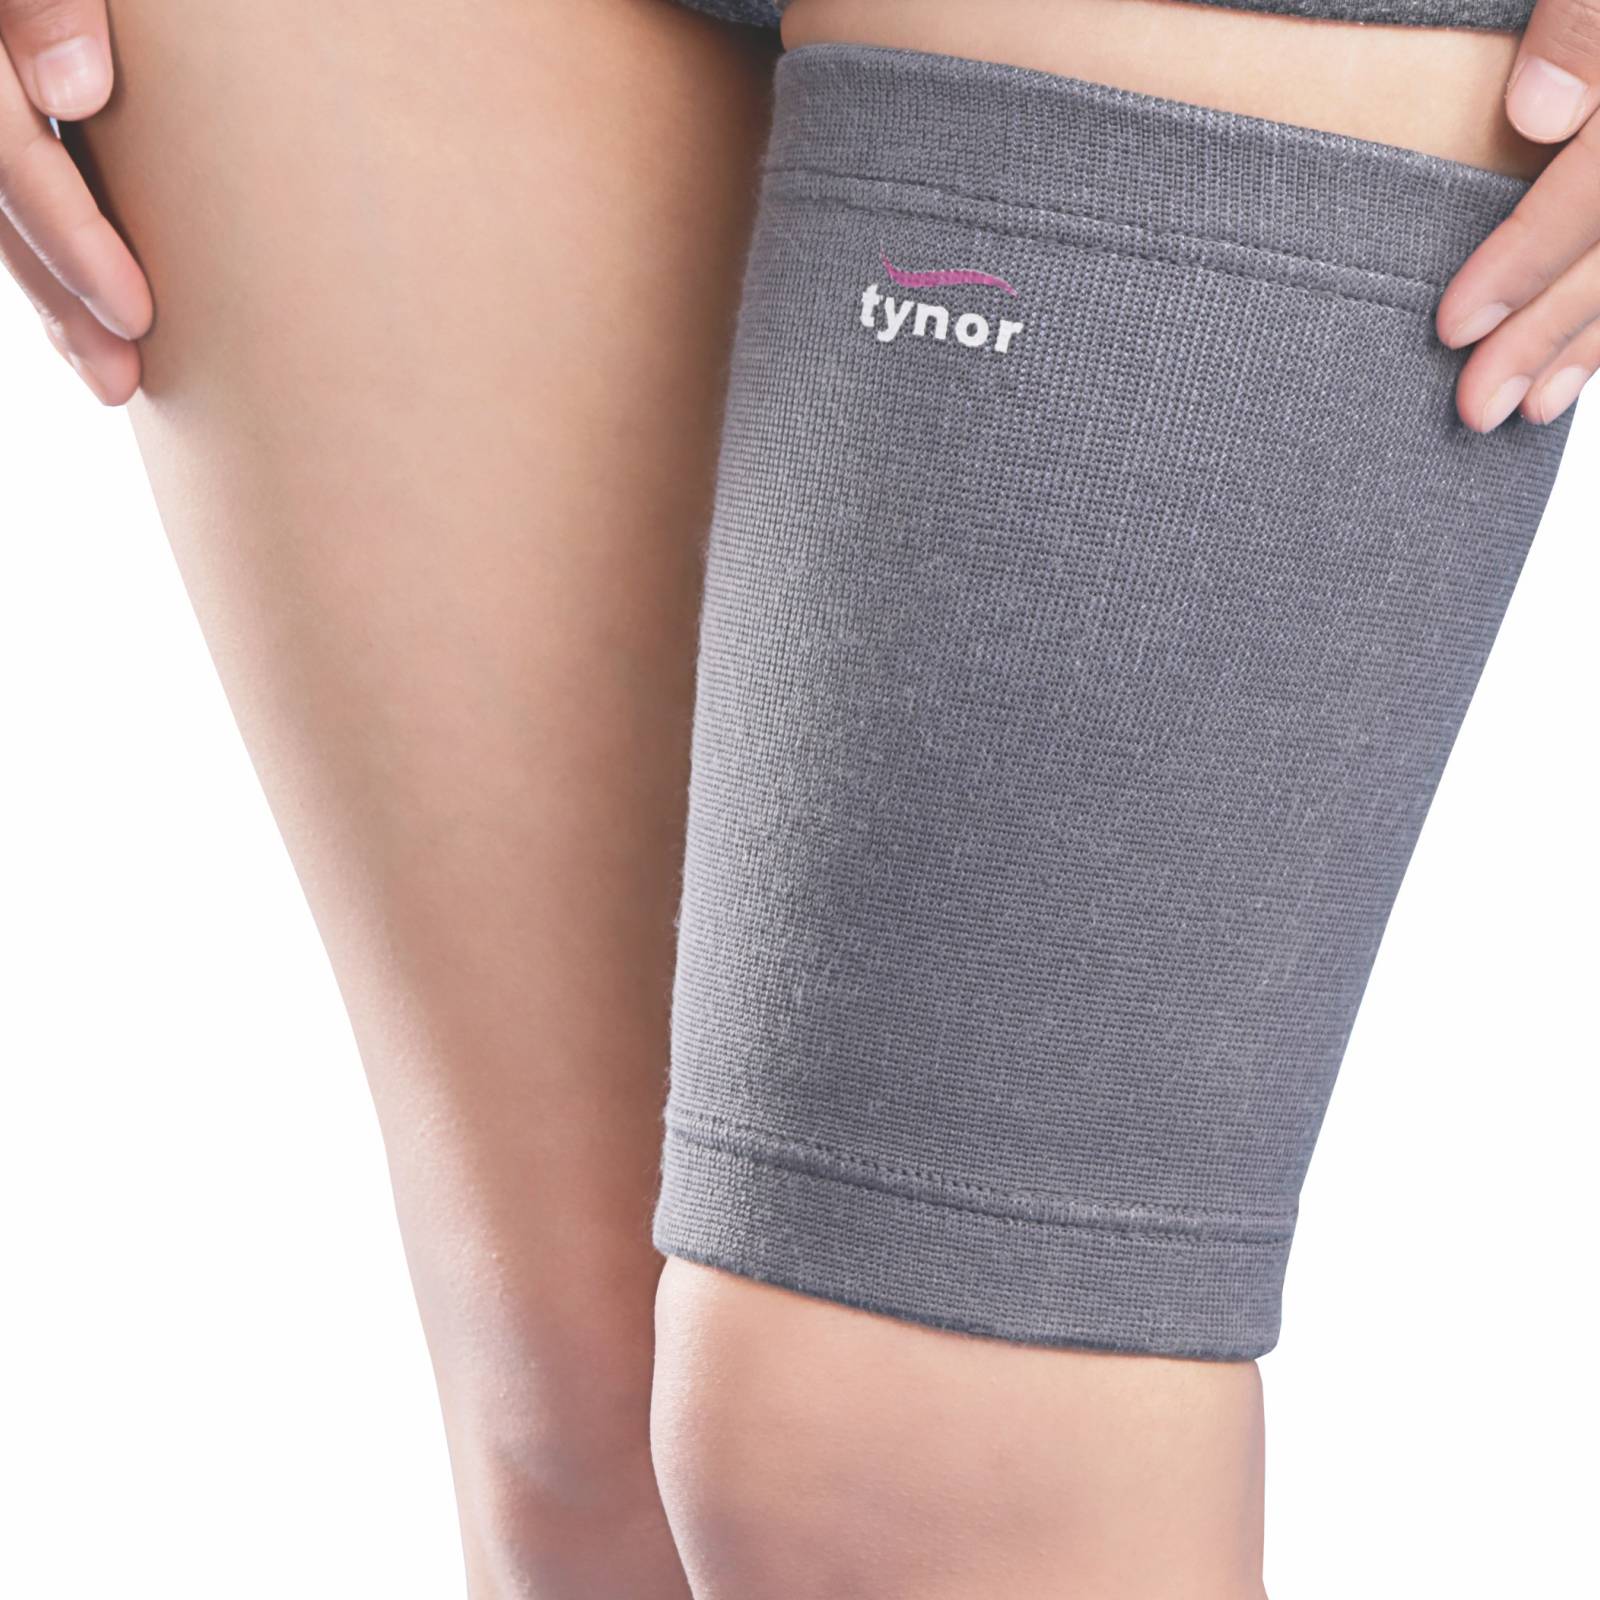 thigh support